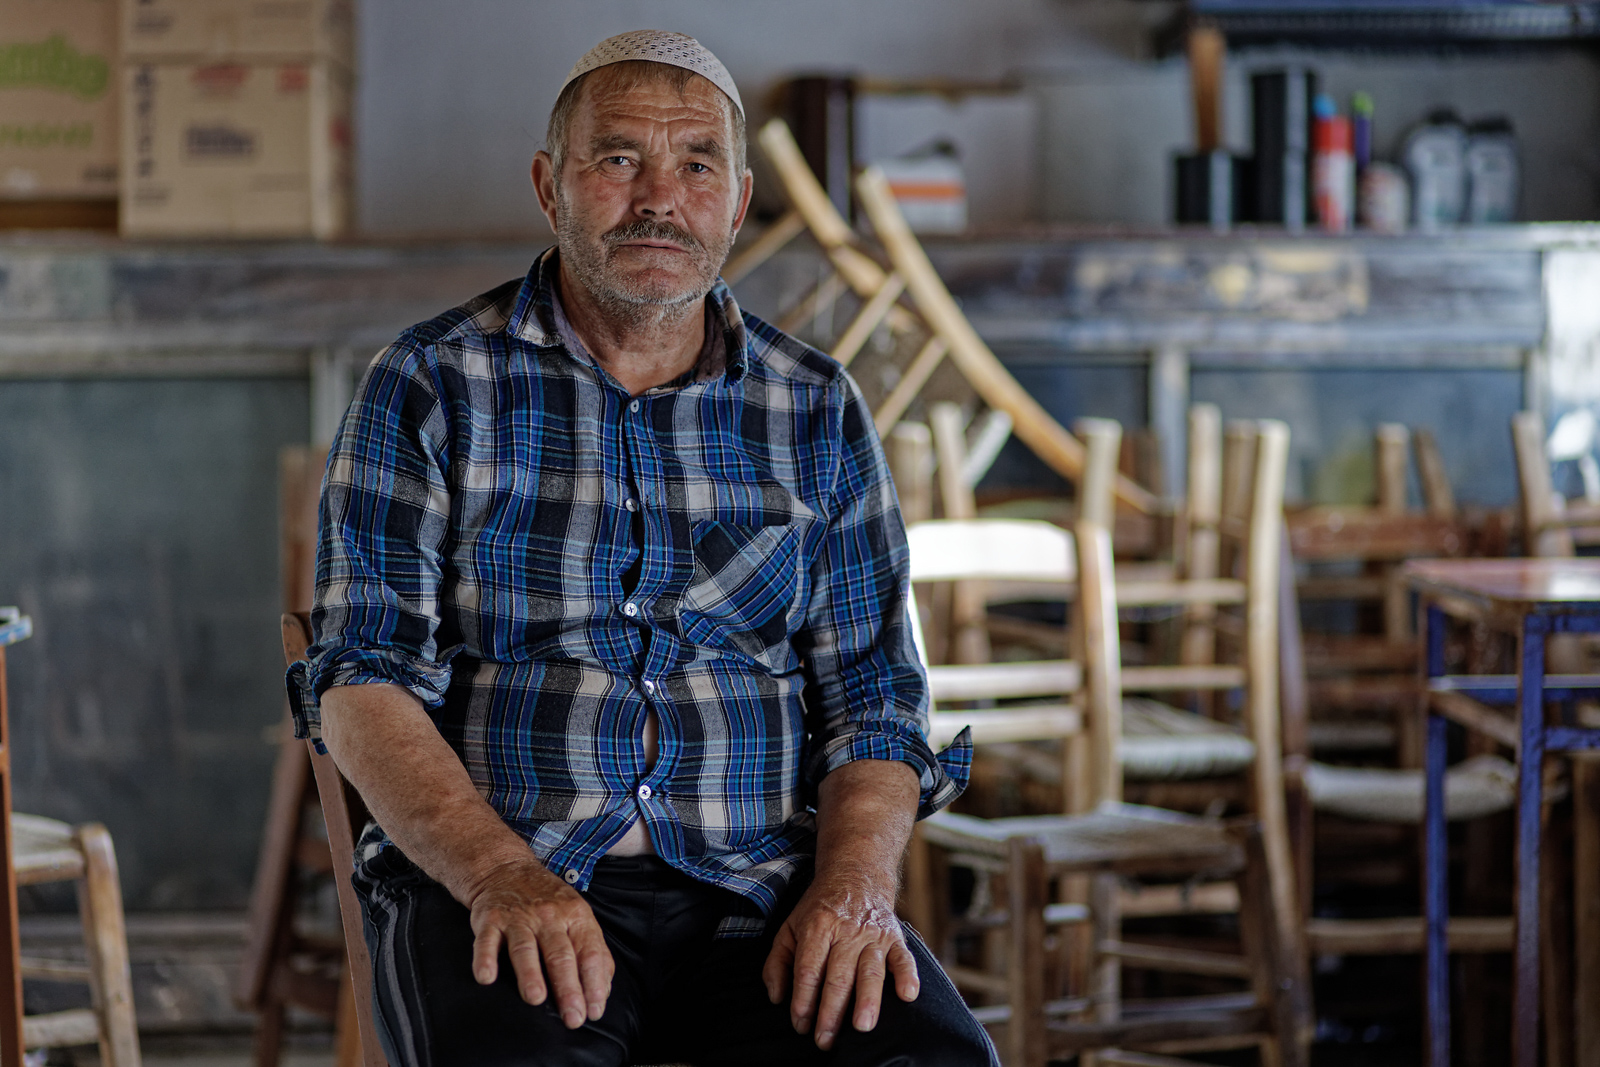 Ahmed Ahmet, 70, is the owner of the traditional cafe-grocery where former Greek foreign minister Dora Bakoyanni held her town hall. Photography for Hyphen by Iason Athanasiadis